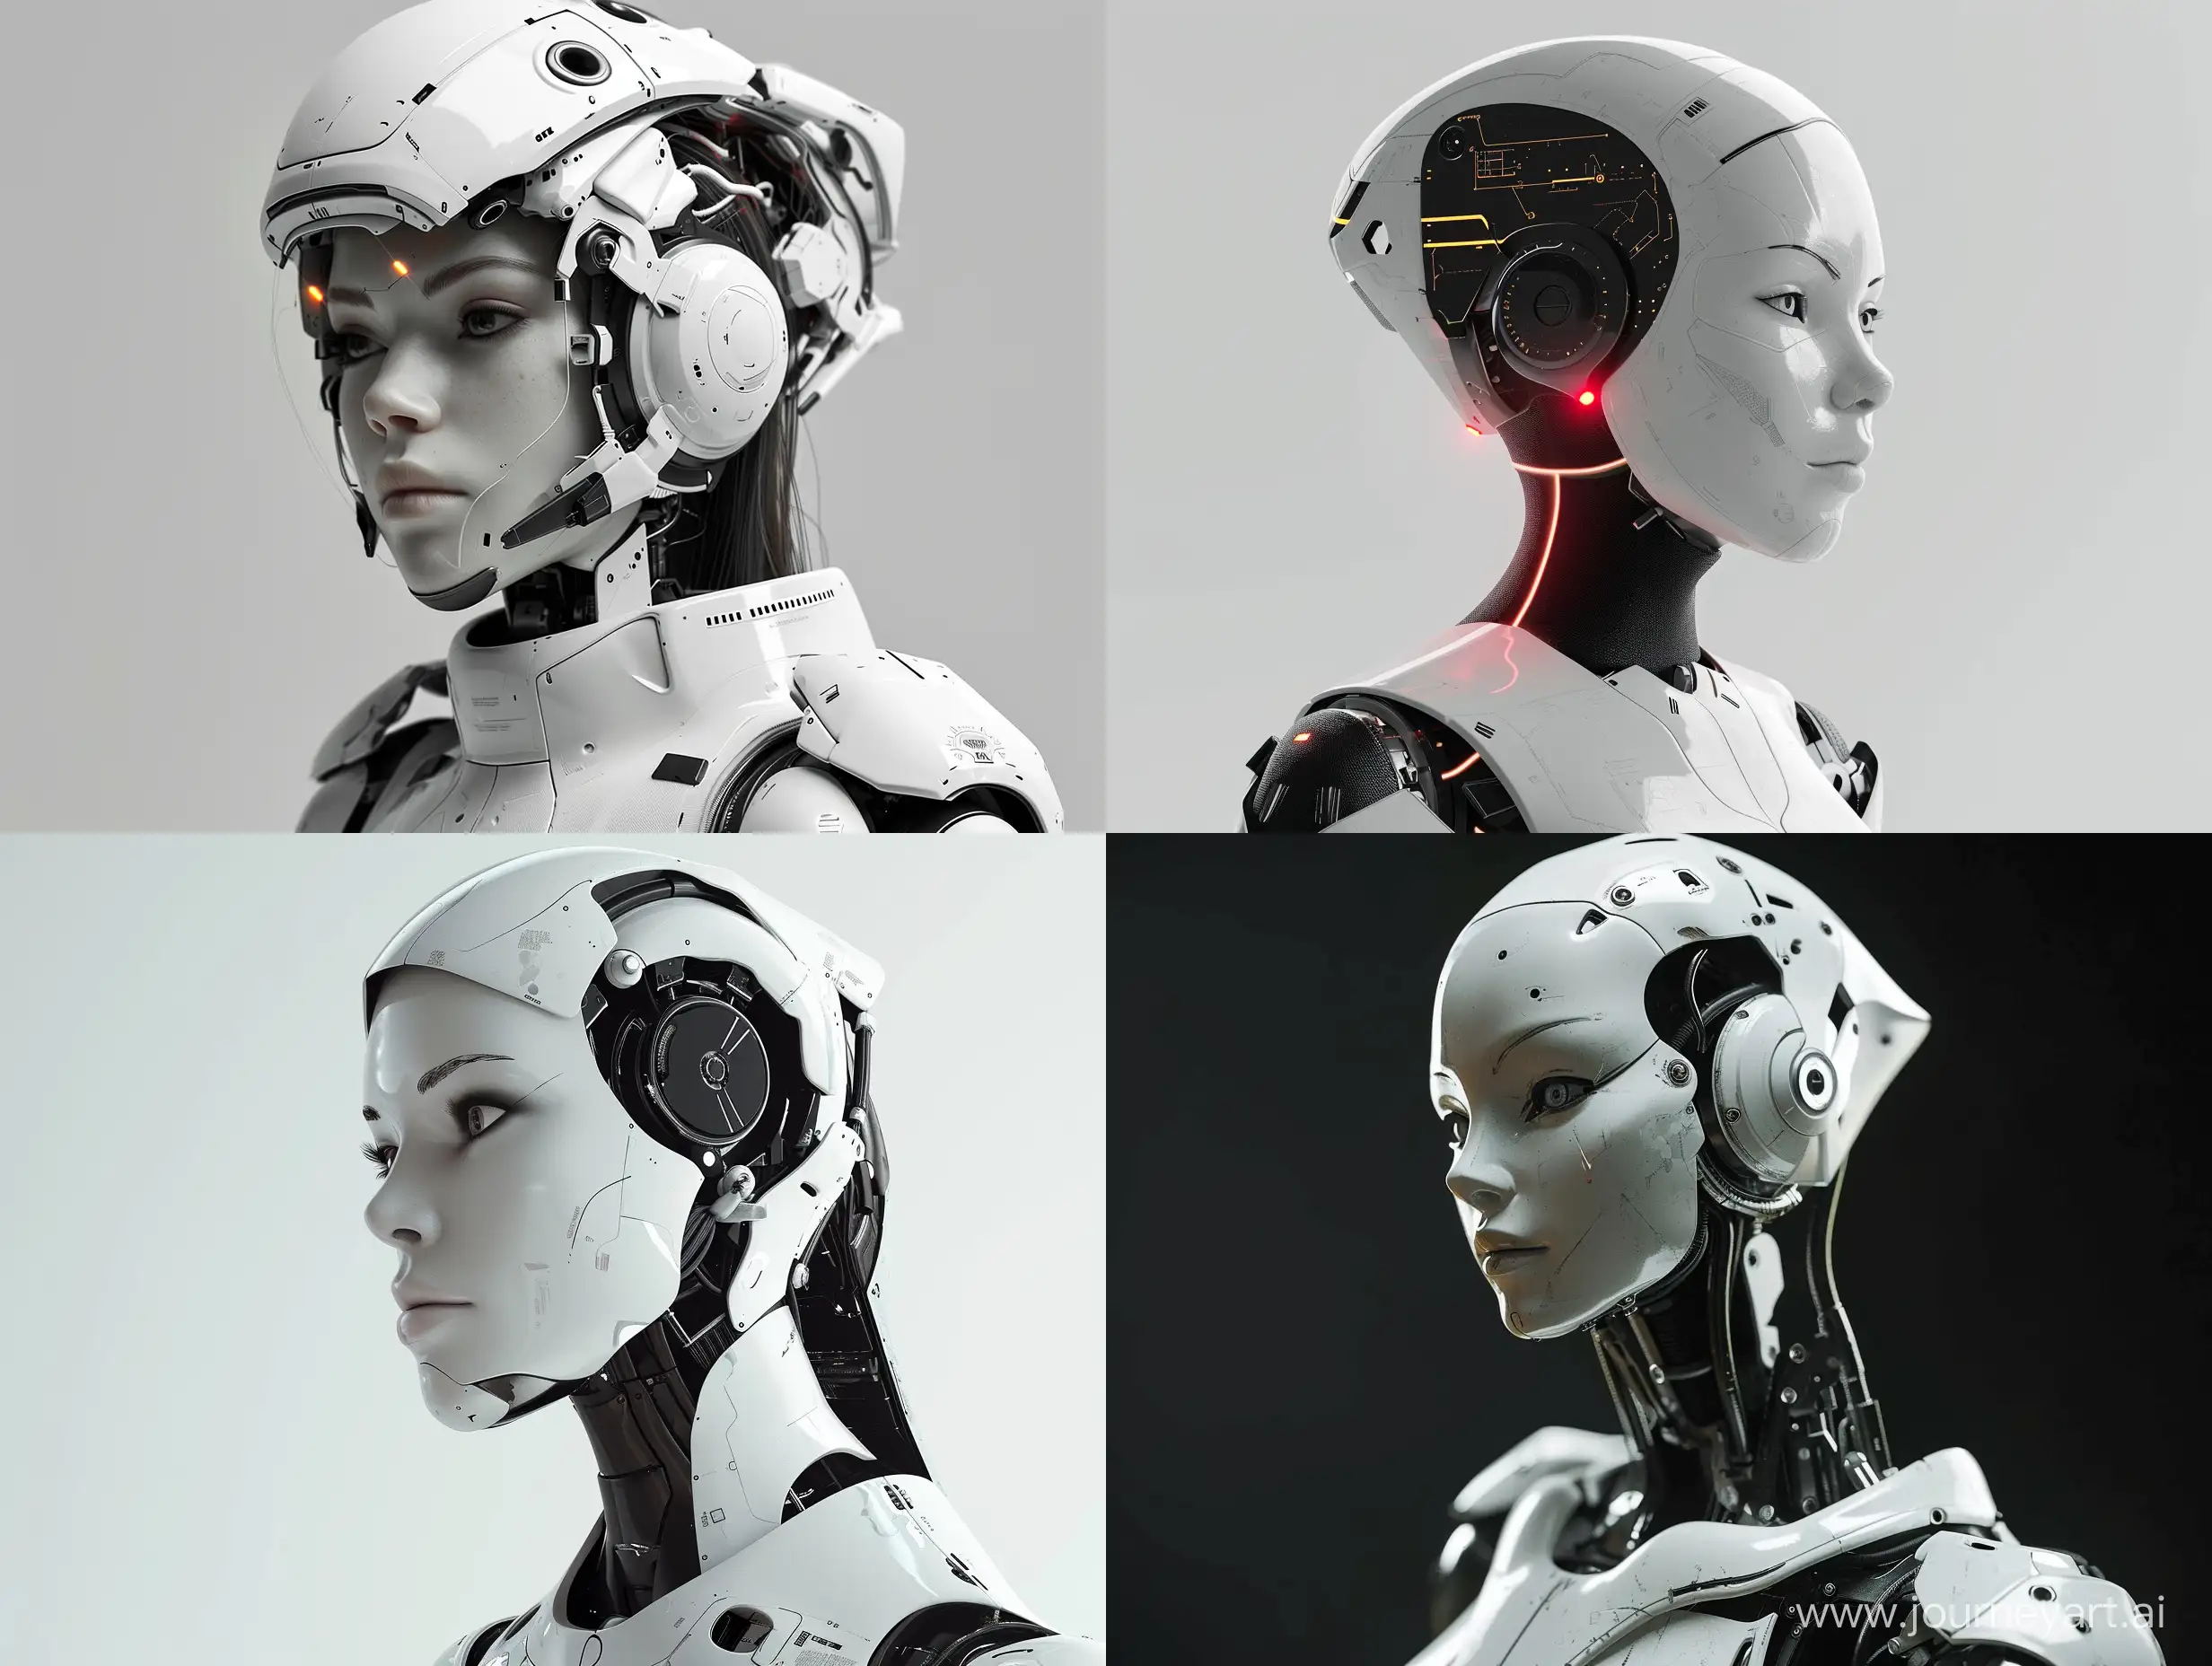 Futuristic-6th-Generation-Female-Robot-in-Stunning-Technology-Display